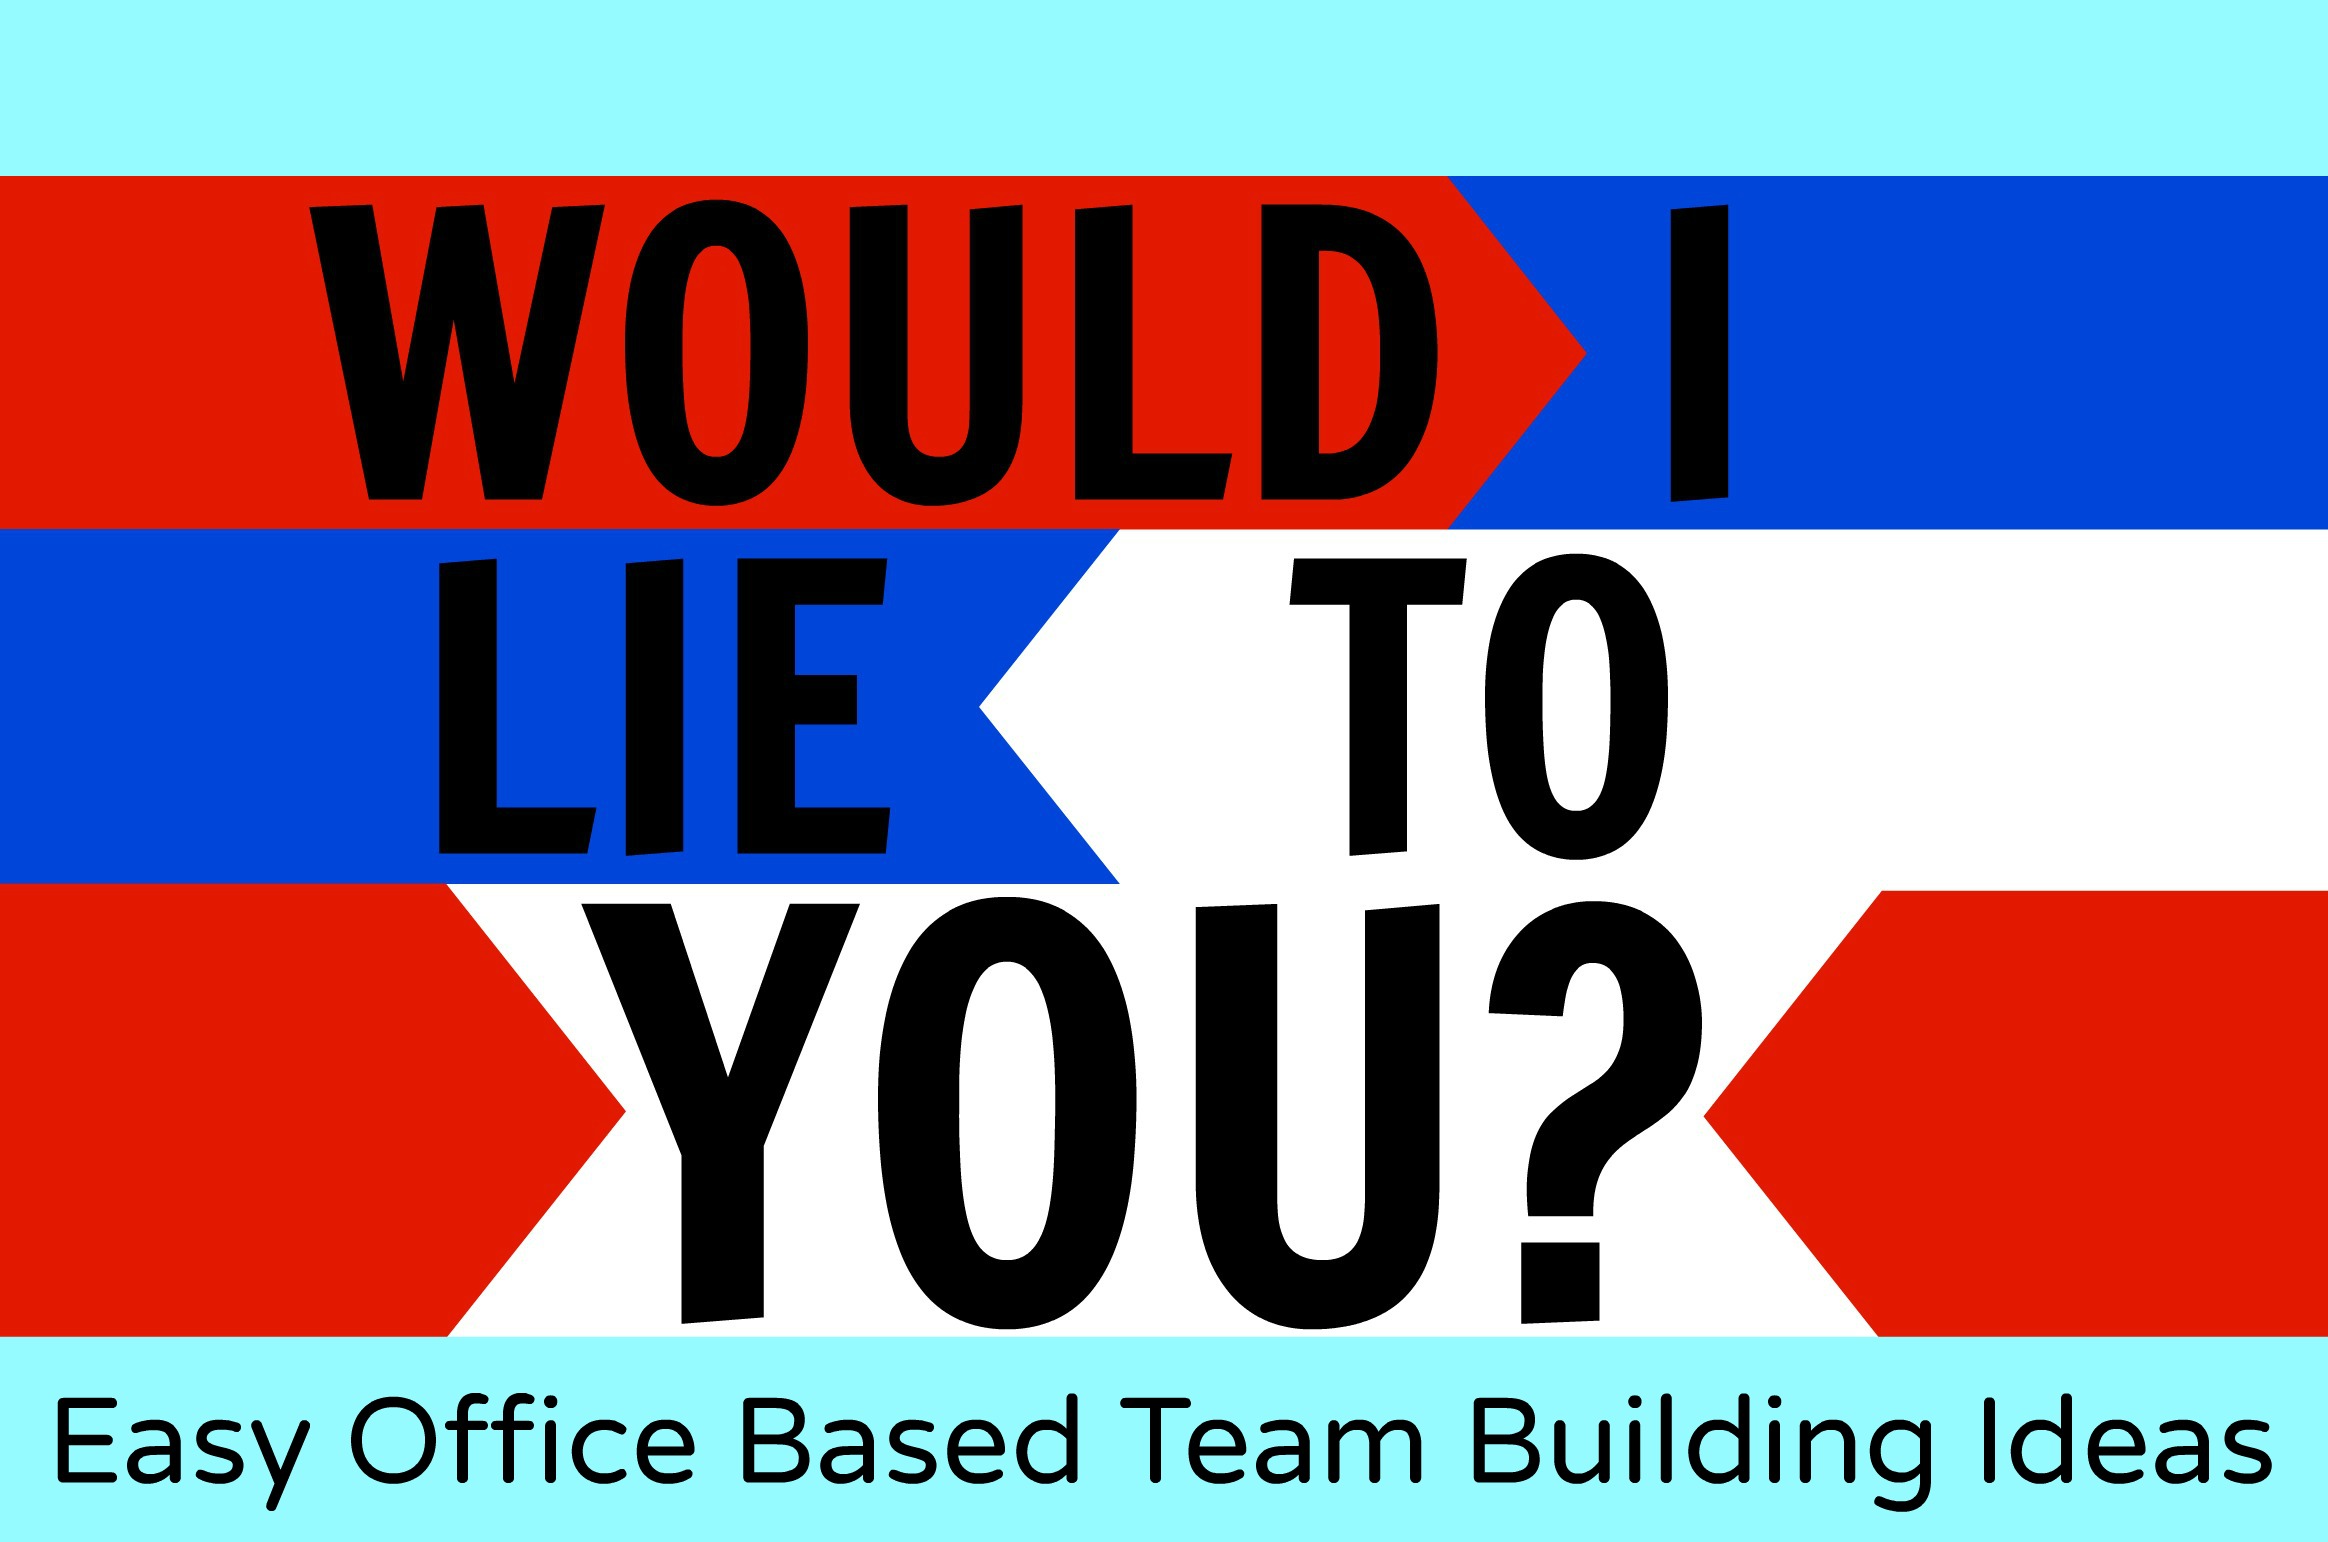 Easy Office Based Team Building Ideas - Would I Lie to You?